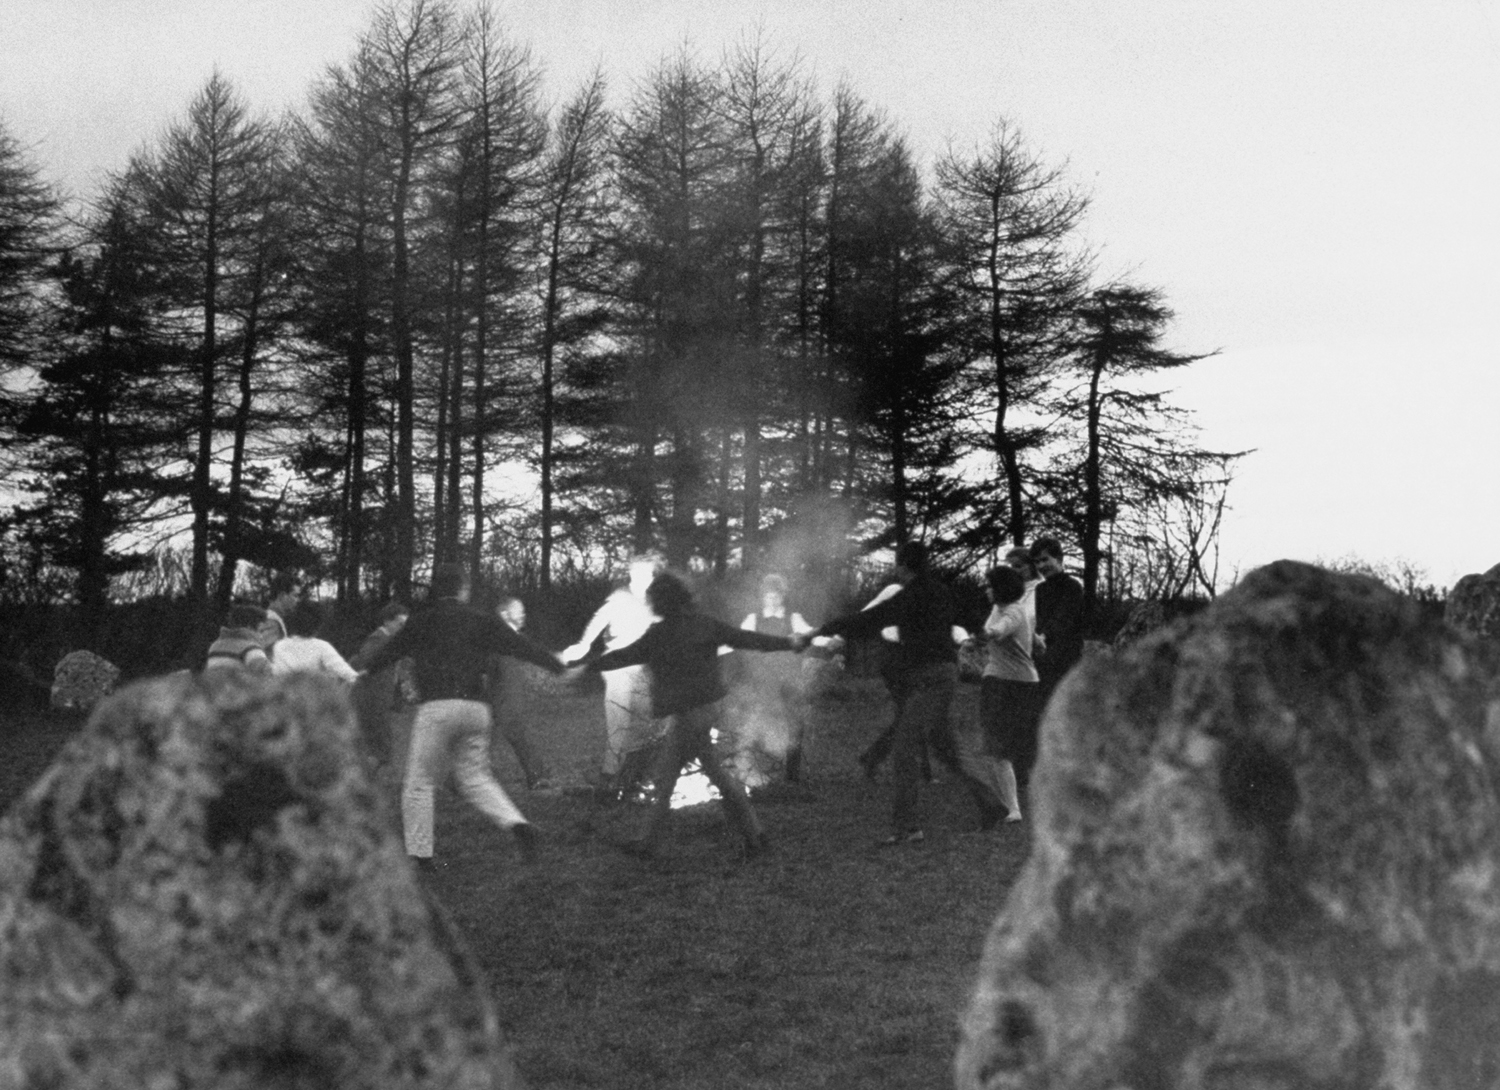 In a thousand-year-old rite, the witches dance around bonfire within prehistoric Rollright stone circle that stands in Oxfordshire.